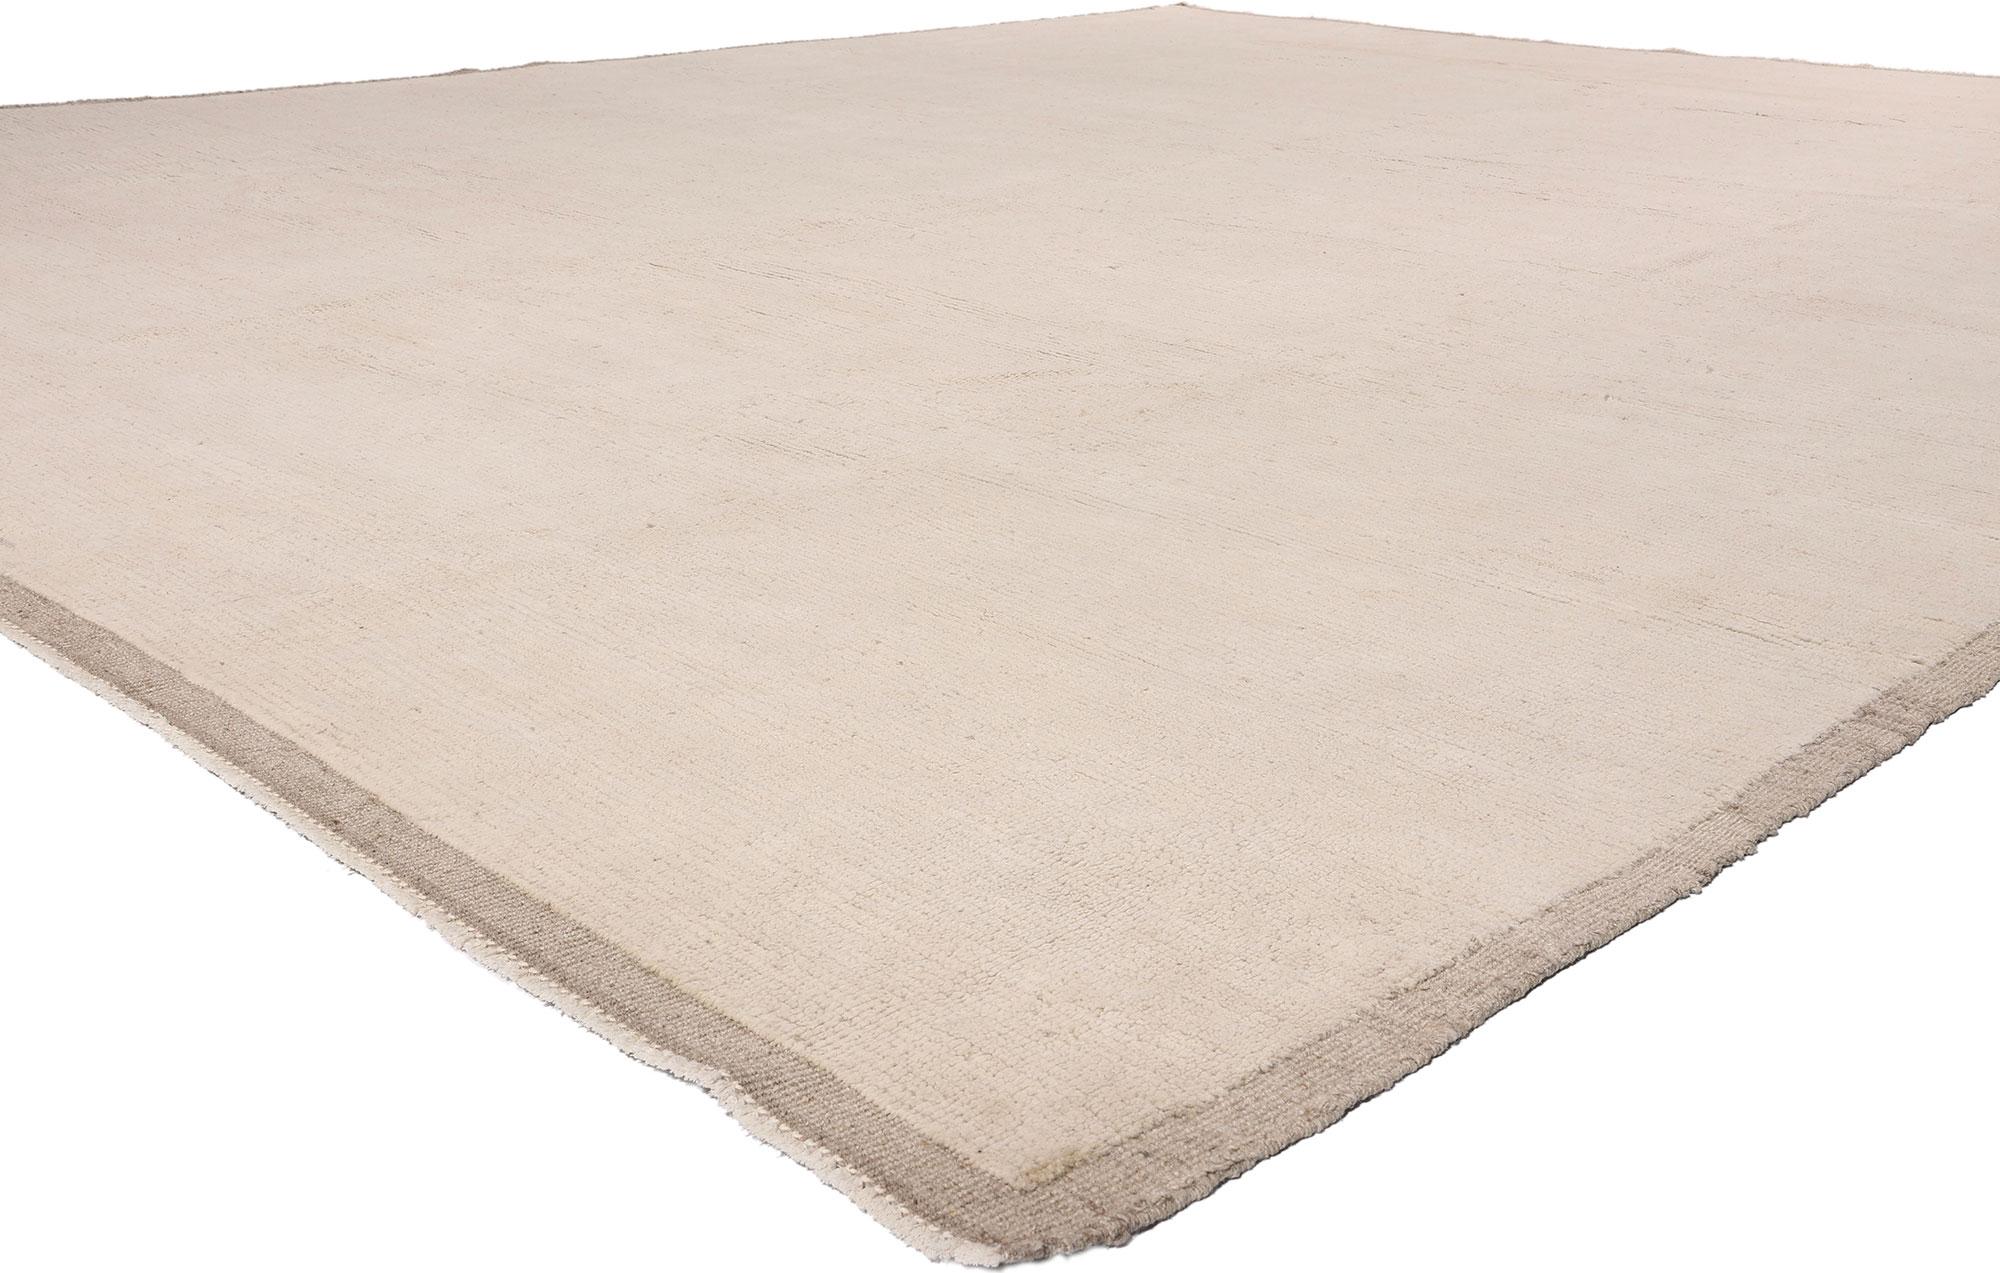 81080 Organic Modern Moroccan Minimalist Rug, 12'02 x 14'11. Enter a realm where understated elegance and tranquil comfort intertwine, guided by the serene allure of this hand-knotted wool Organic Modern Shibui Moroccan area rug. Crafted with